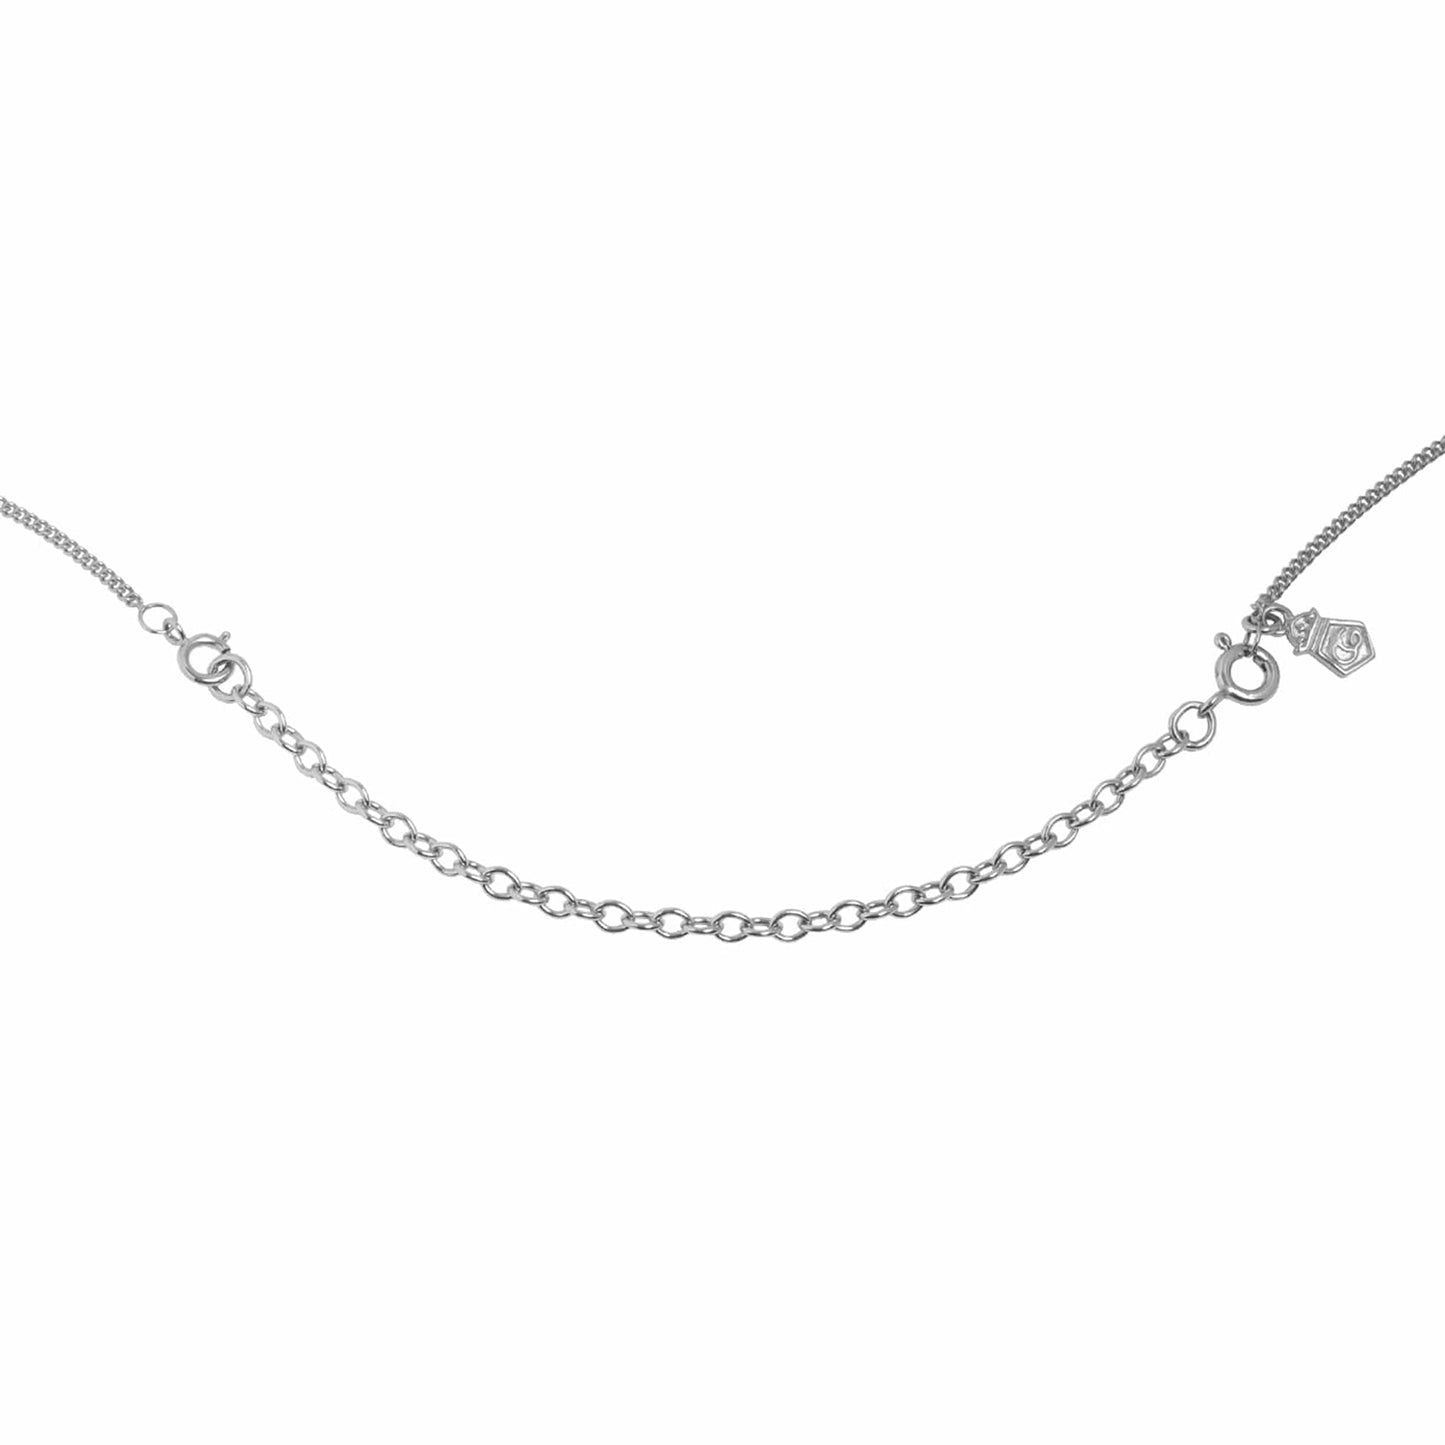 Silver 4 Inch Extension Chain